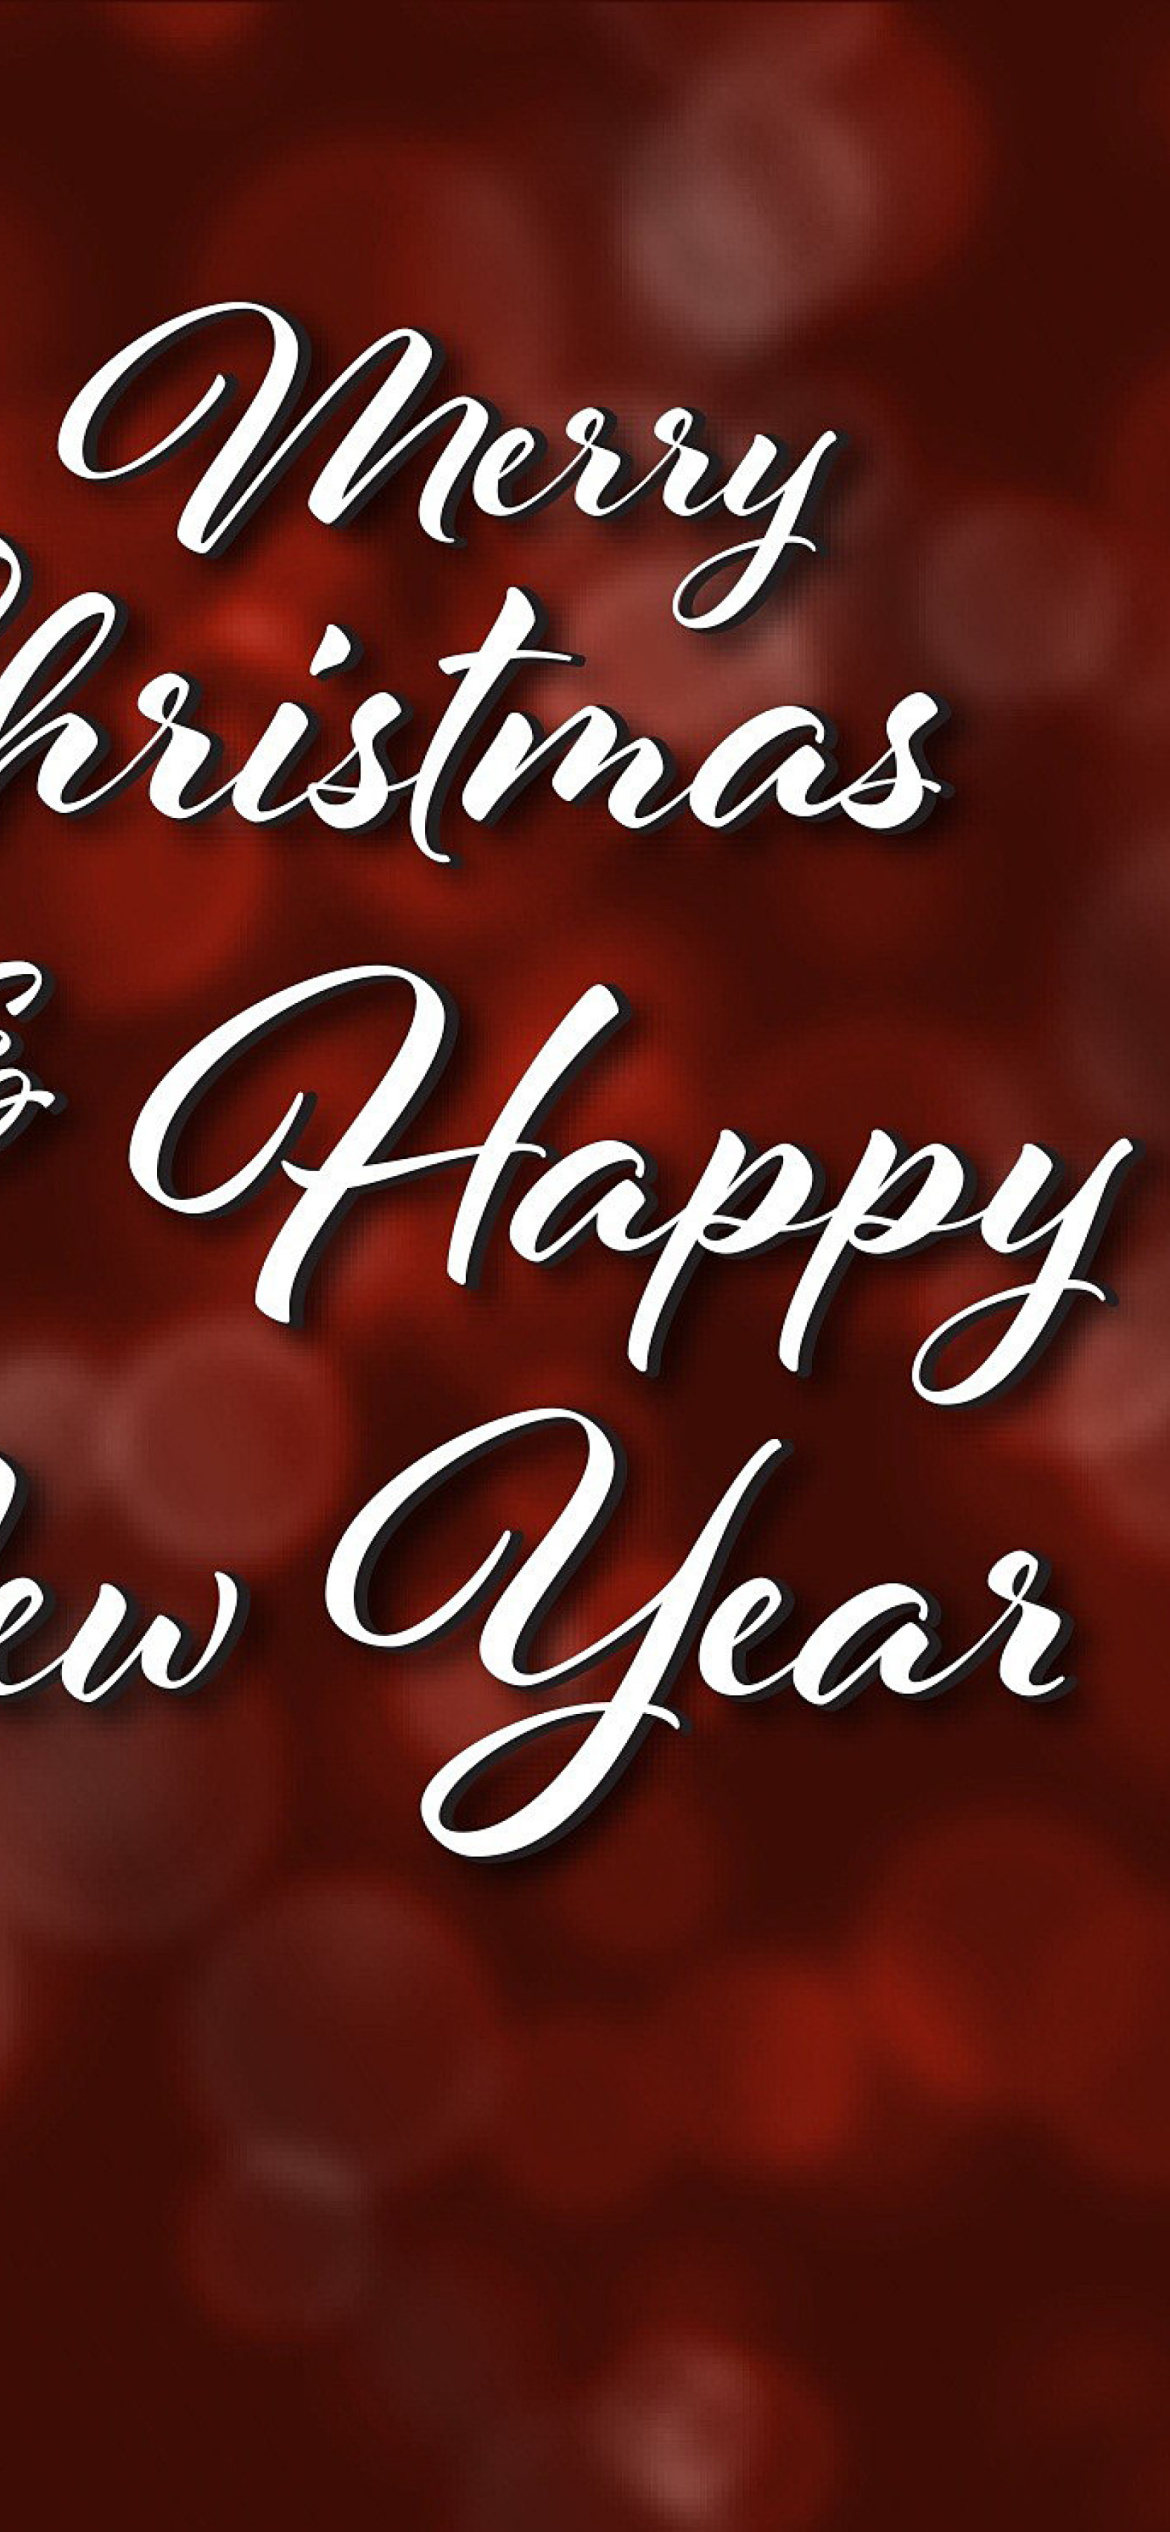 Merry Christmas and Best Wishes for a Happy New Year screenshot #1 1170x2532